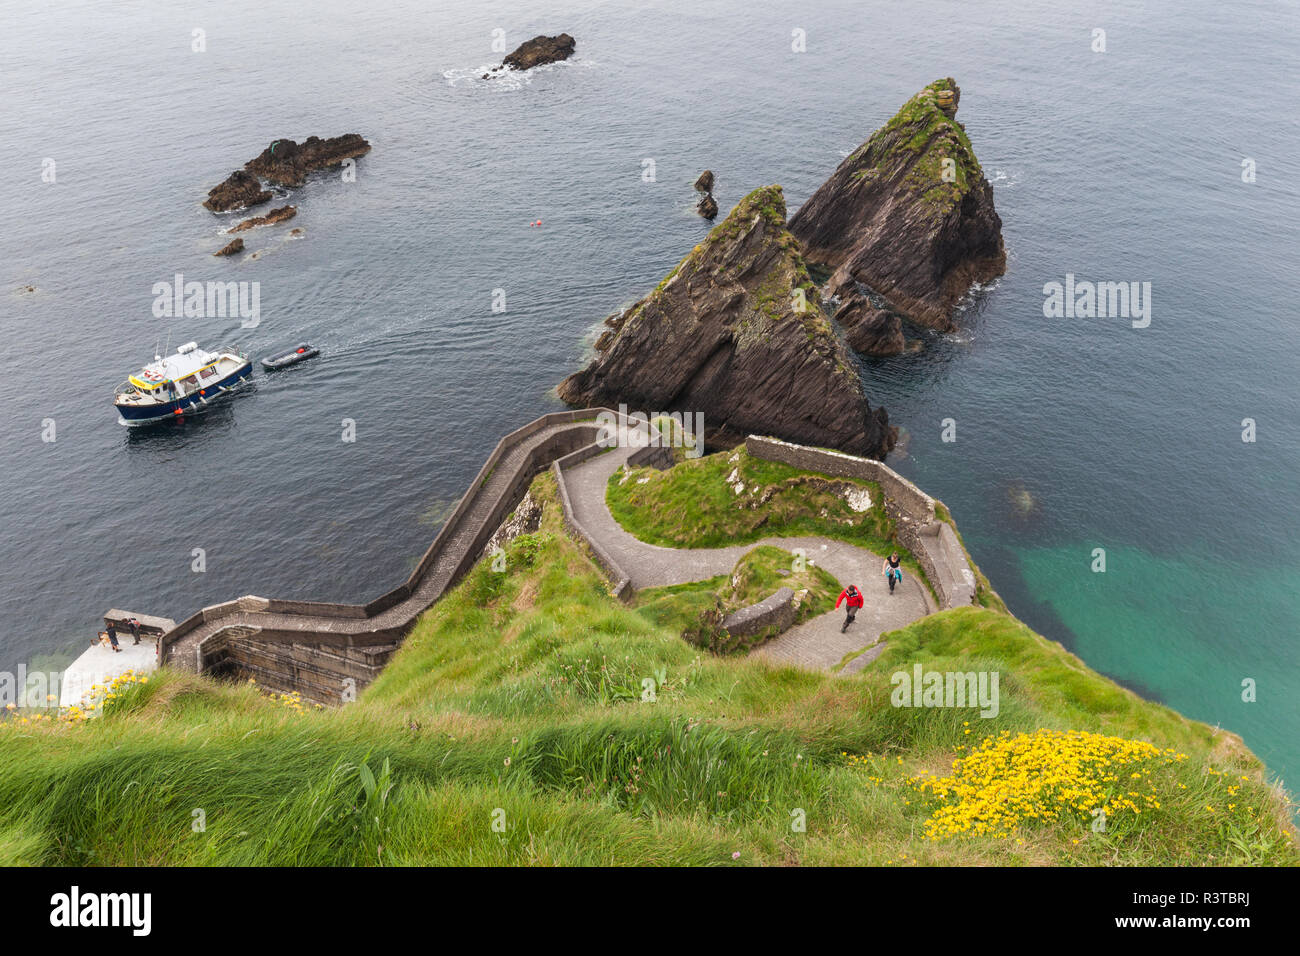 Ireland County Kerry Dingle Peninsula Slea Head Drive Dunquin Elevated View Of The Dunquin Pier Stock Photo Alamy